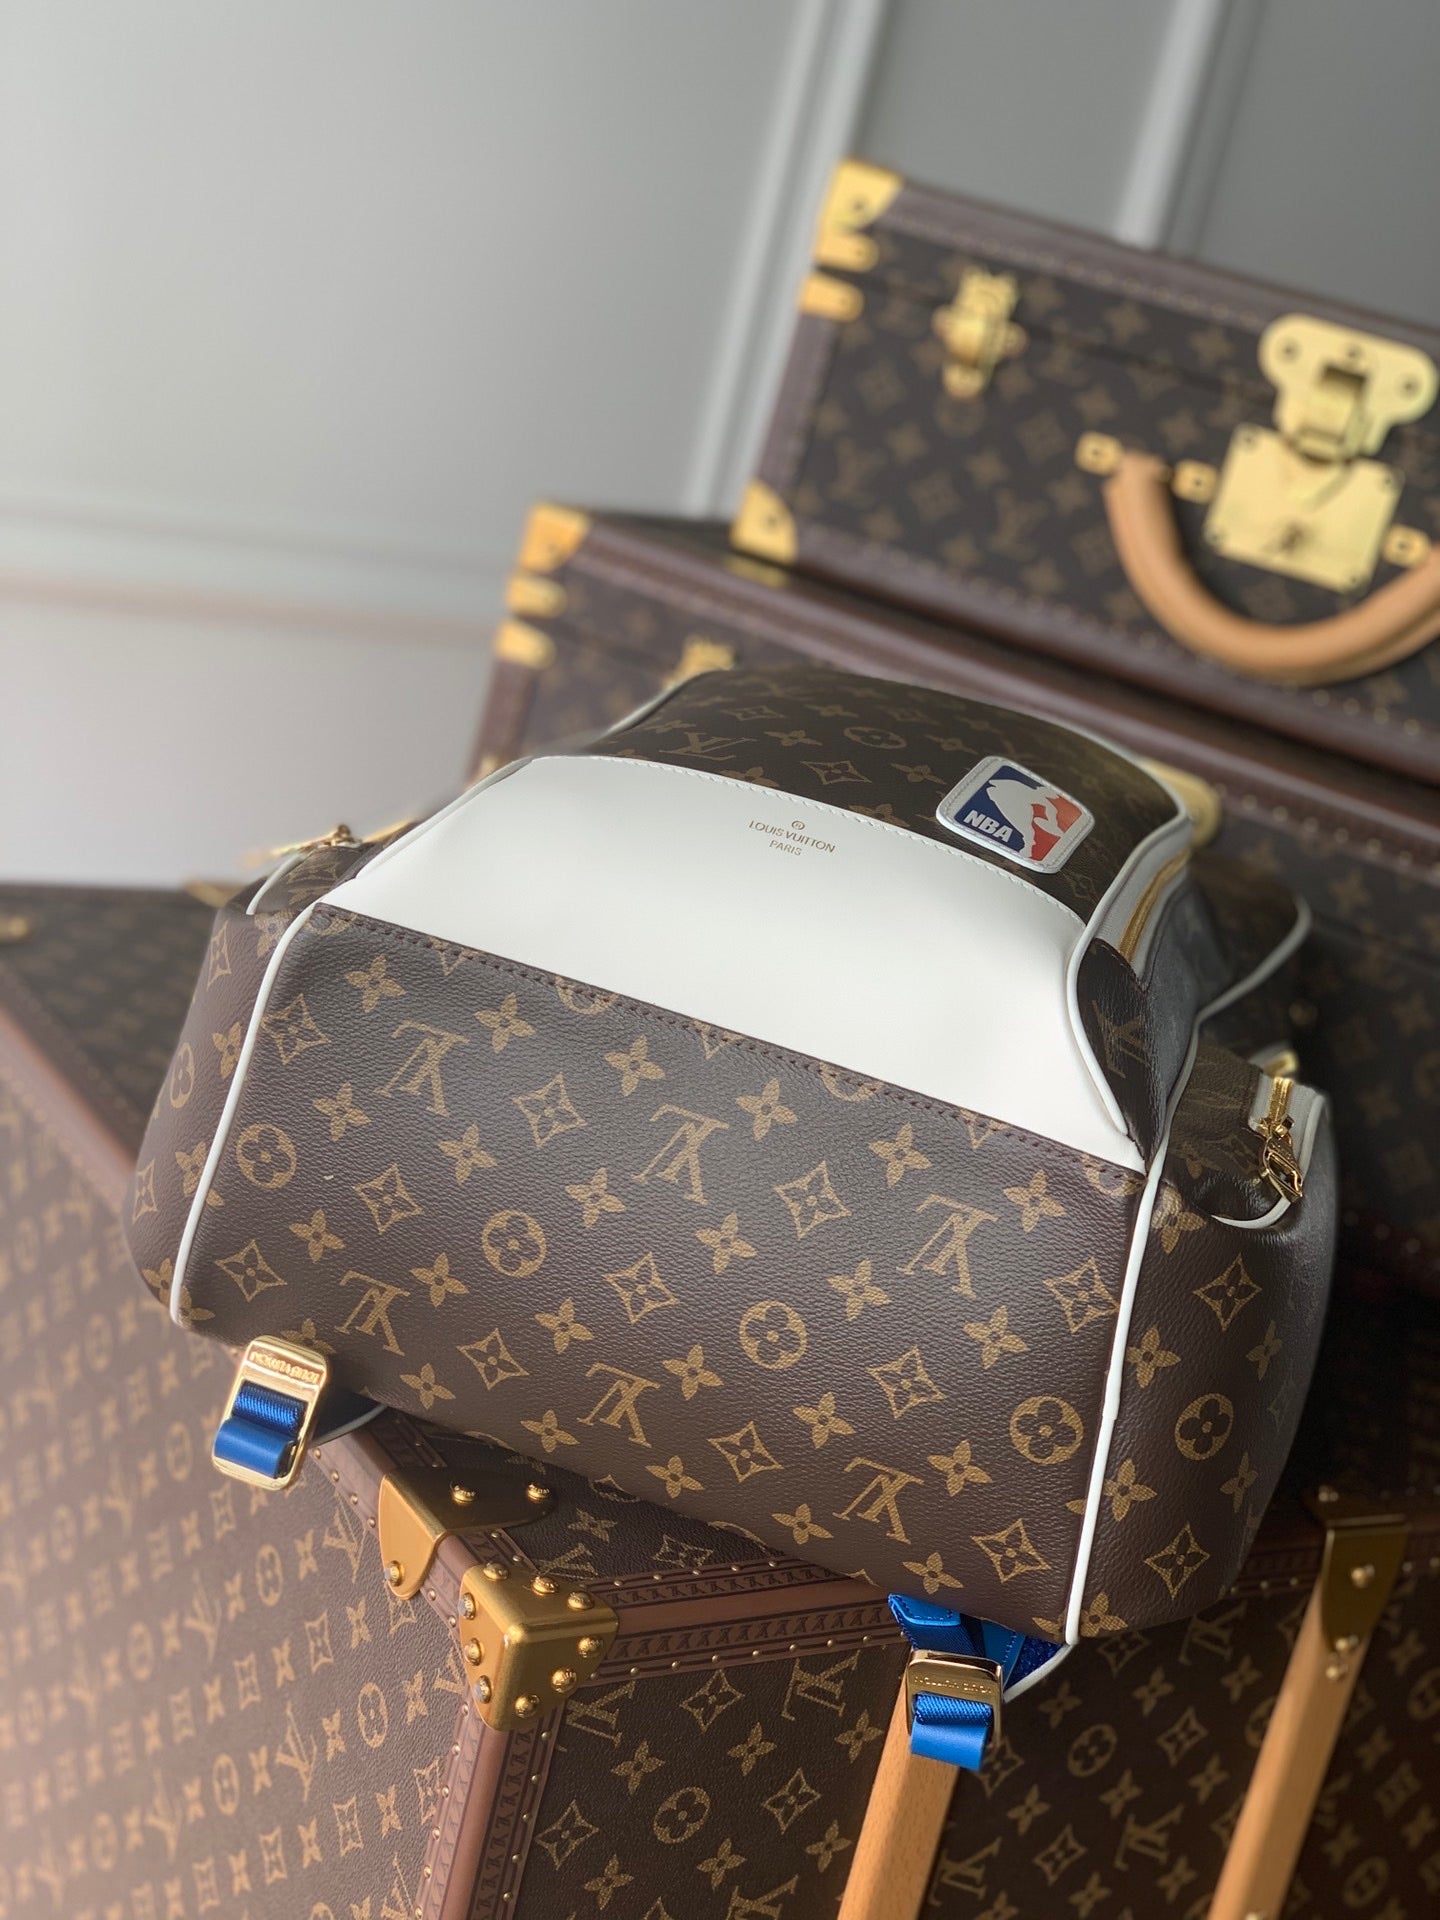 Louis Vuitton Nba Backpack - For Sale on 1stDibs